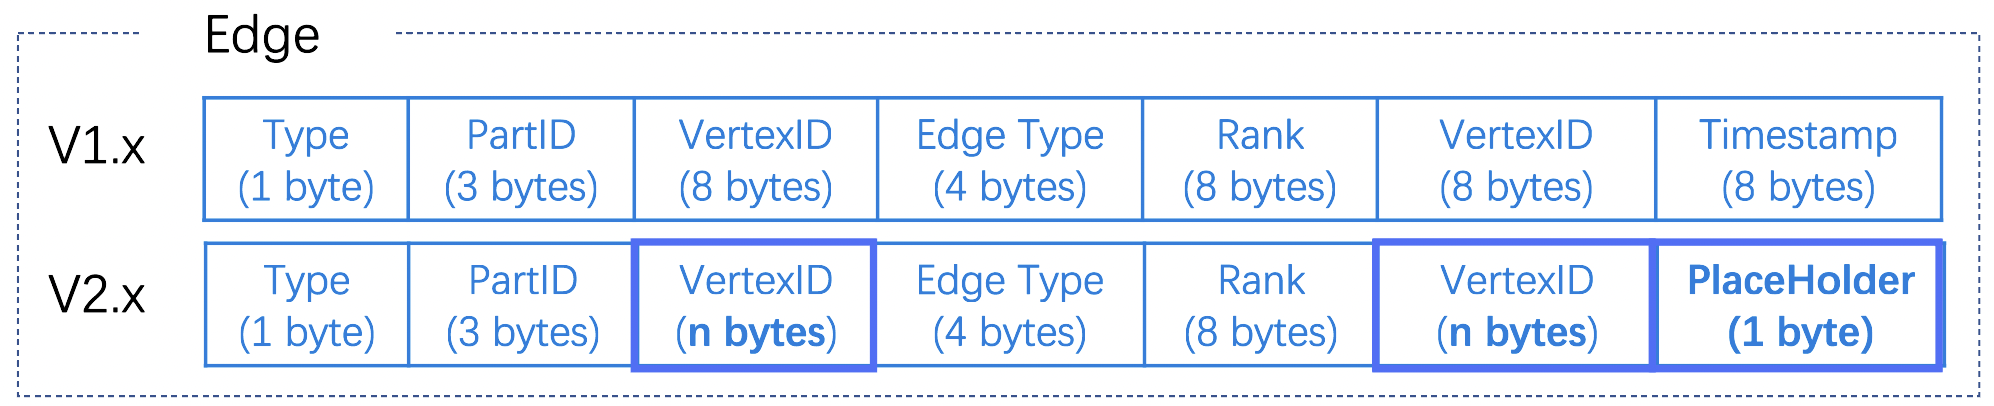 The edge format of storage service